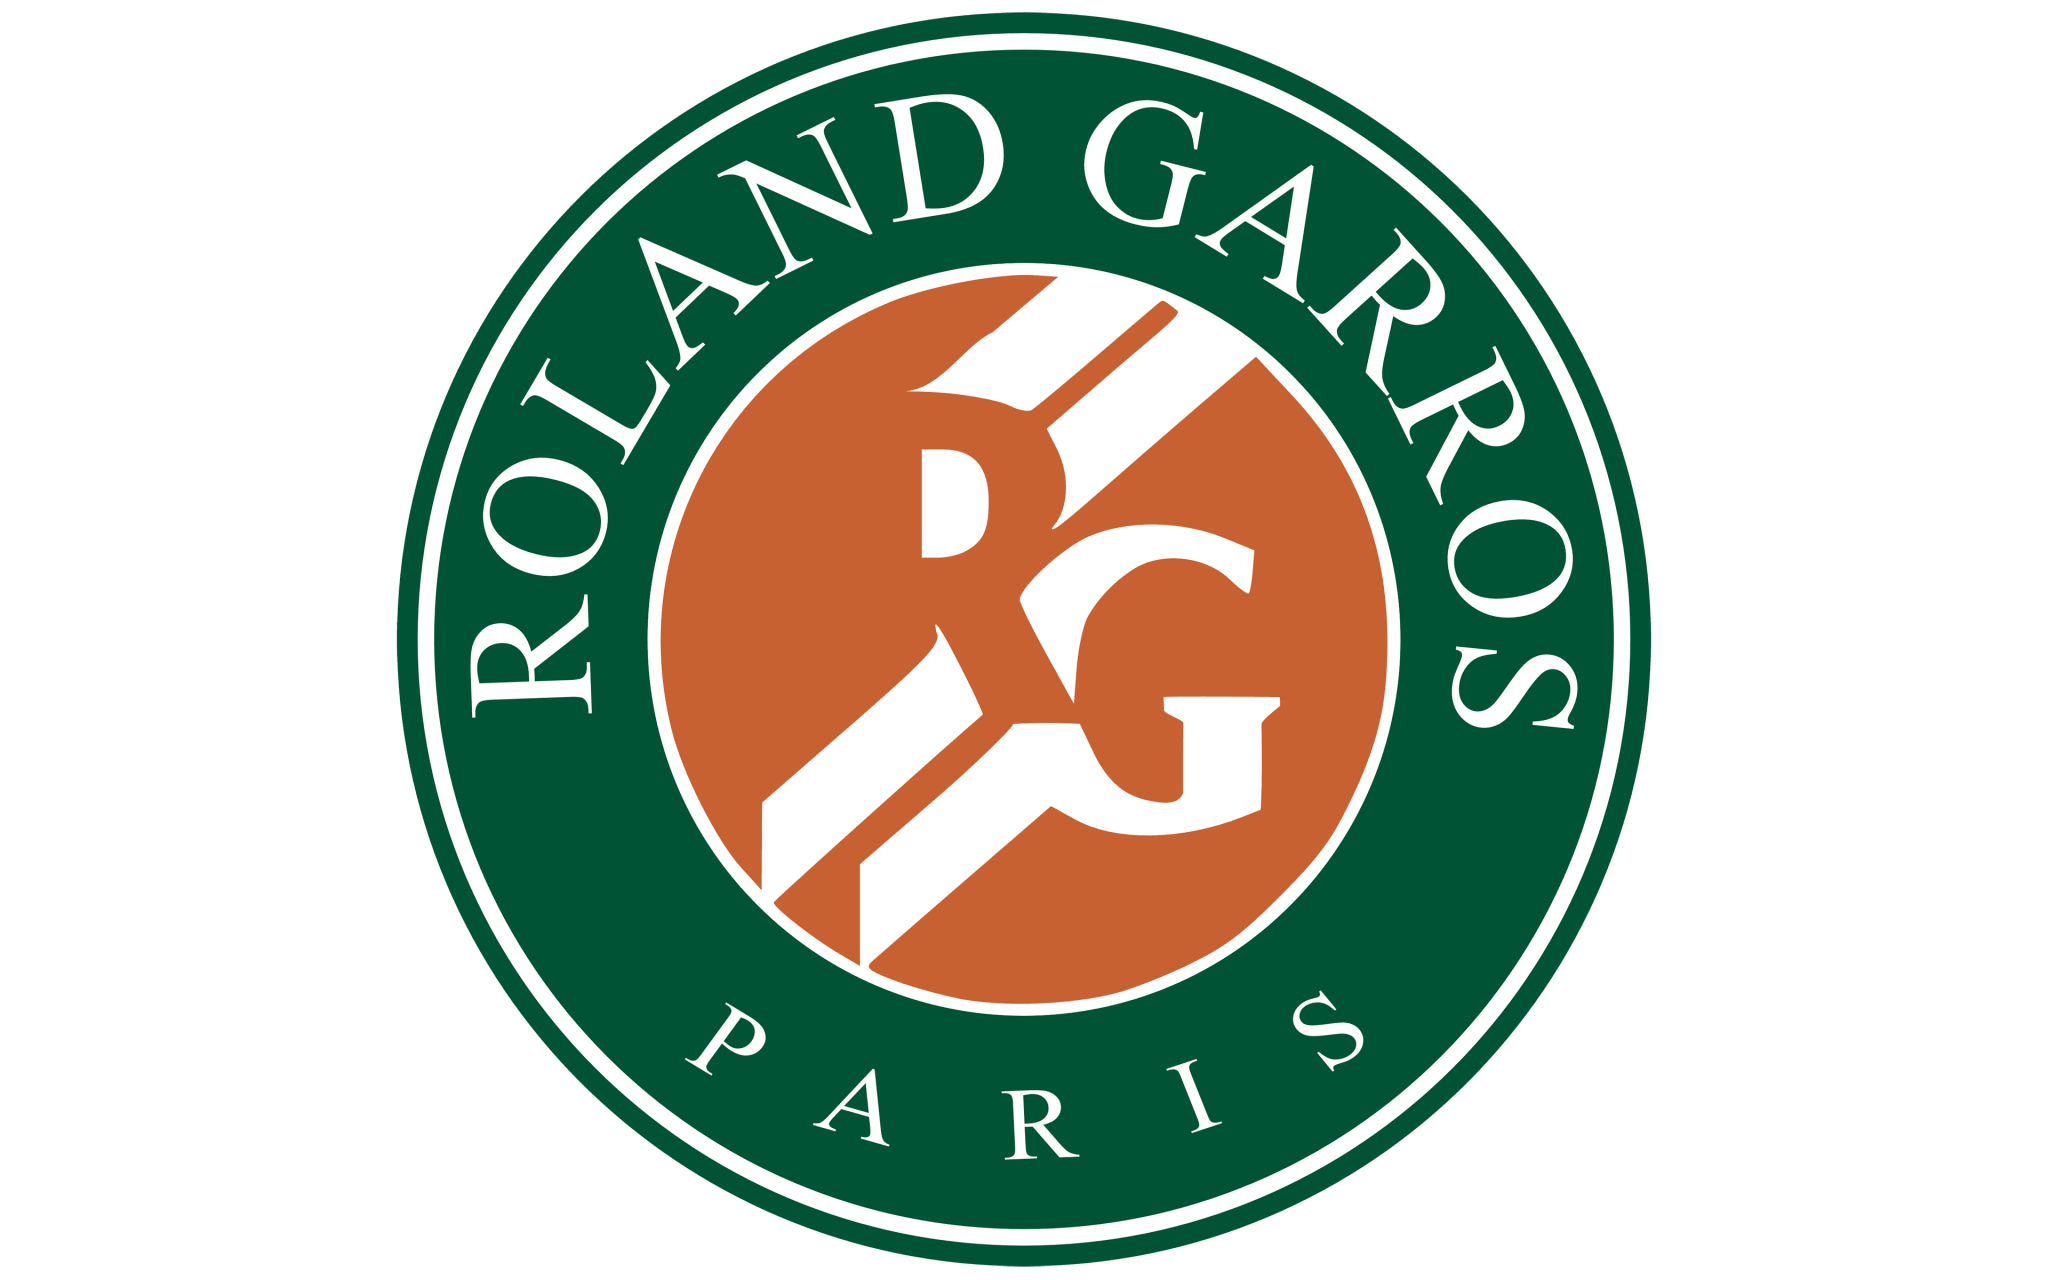 Roland Garros logo and symbol, meaning, history, PNG